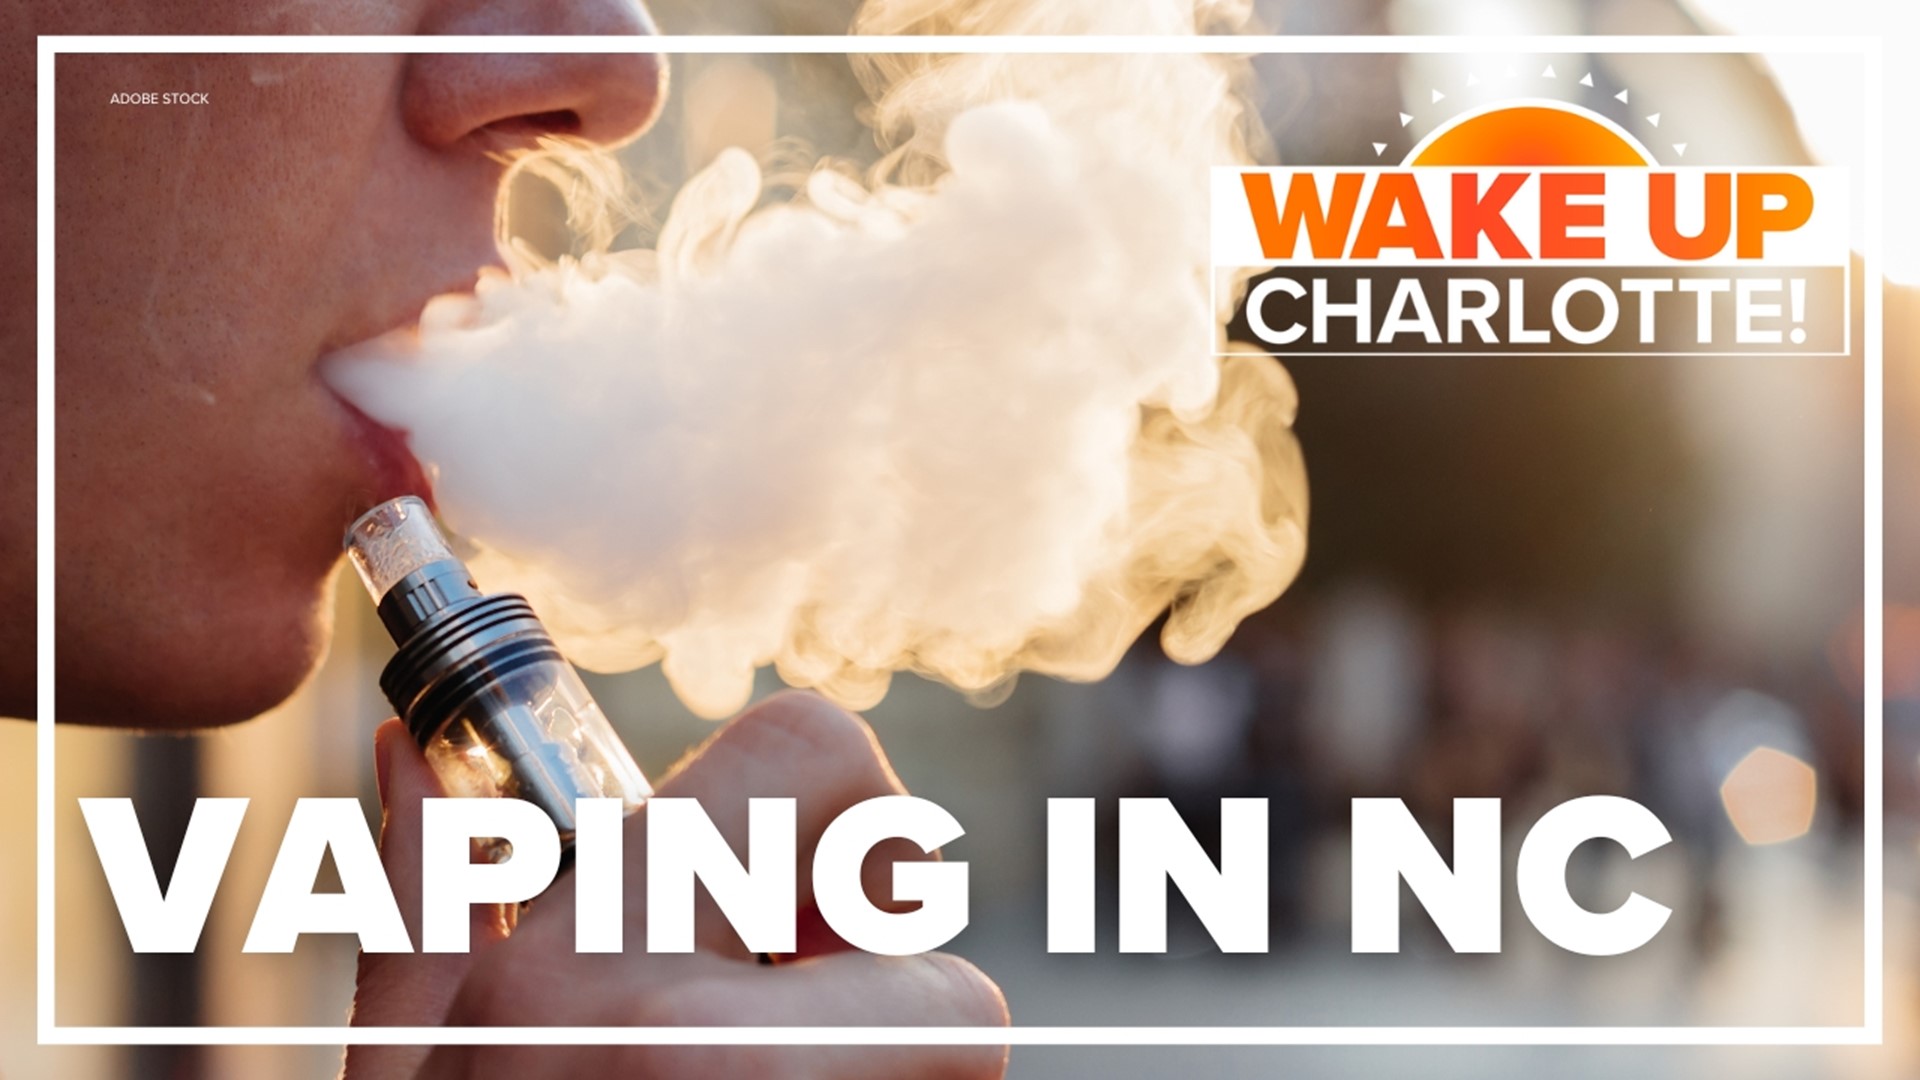 According to the CDC, young adults in North Carolina are vaping more than any other age group.